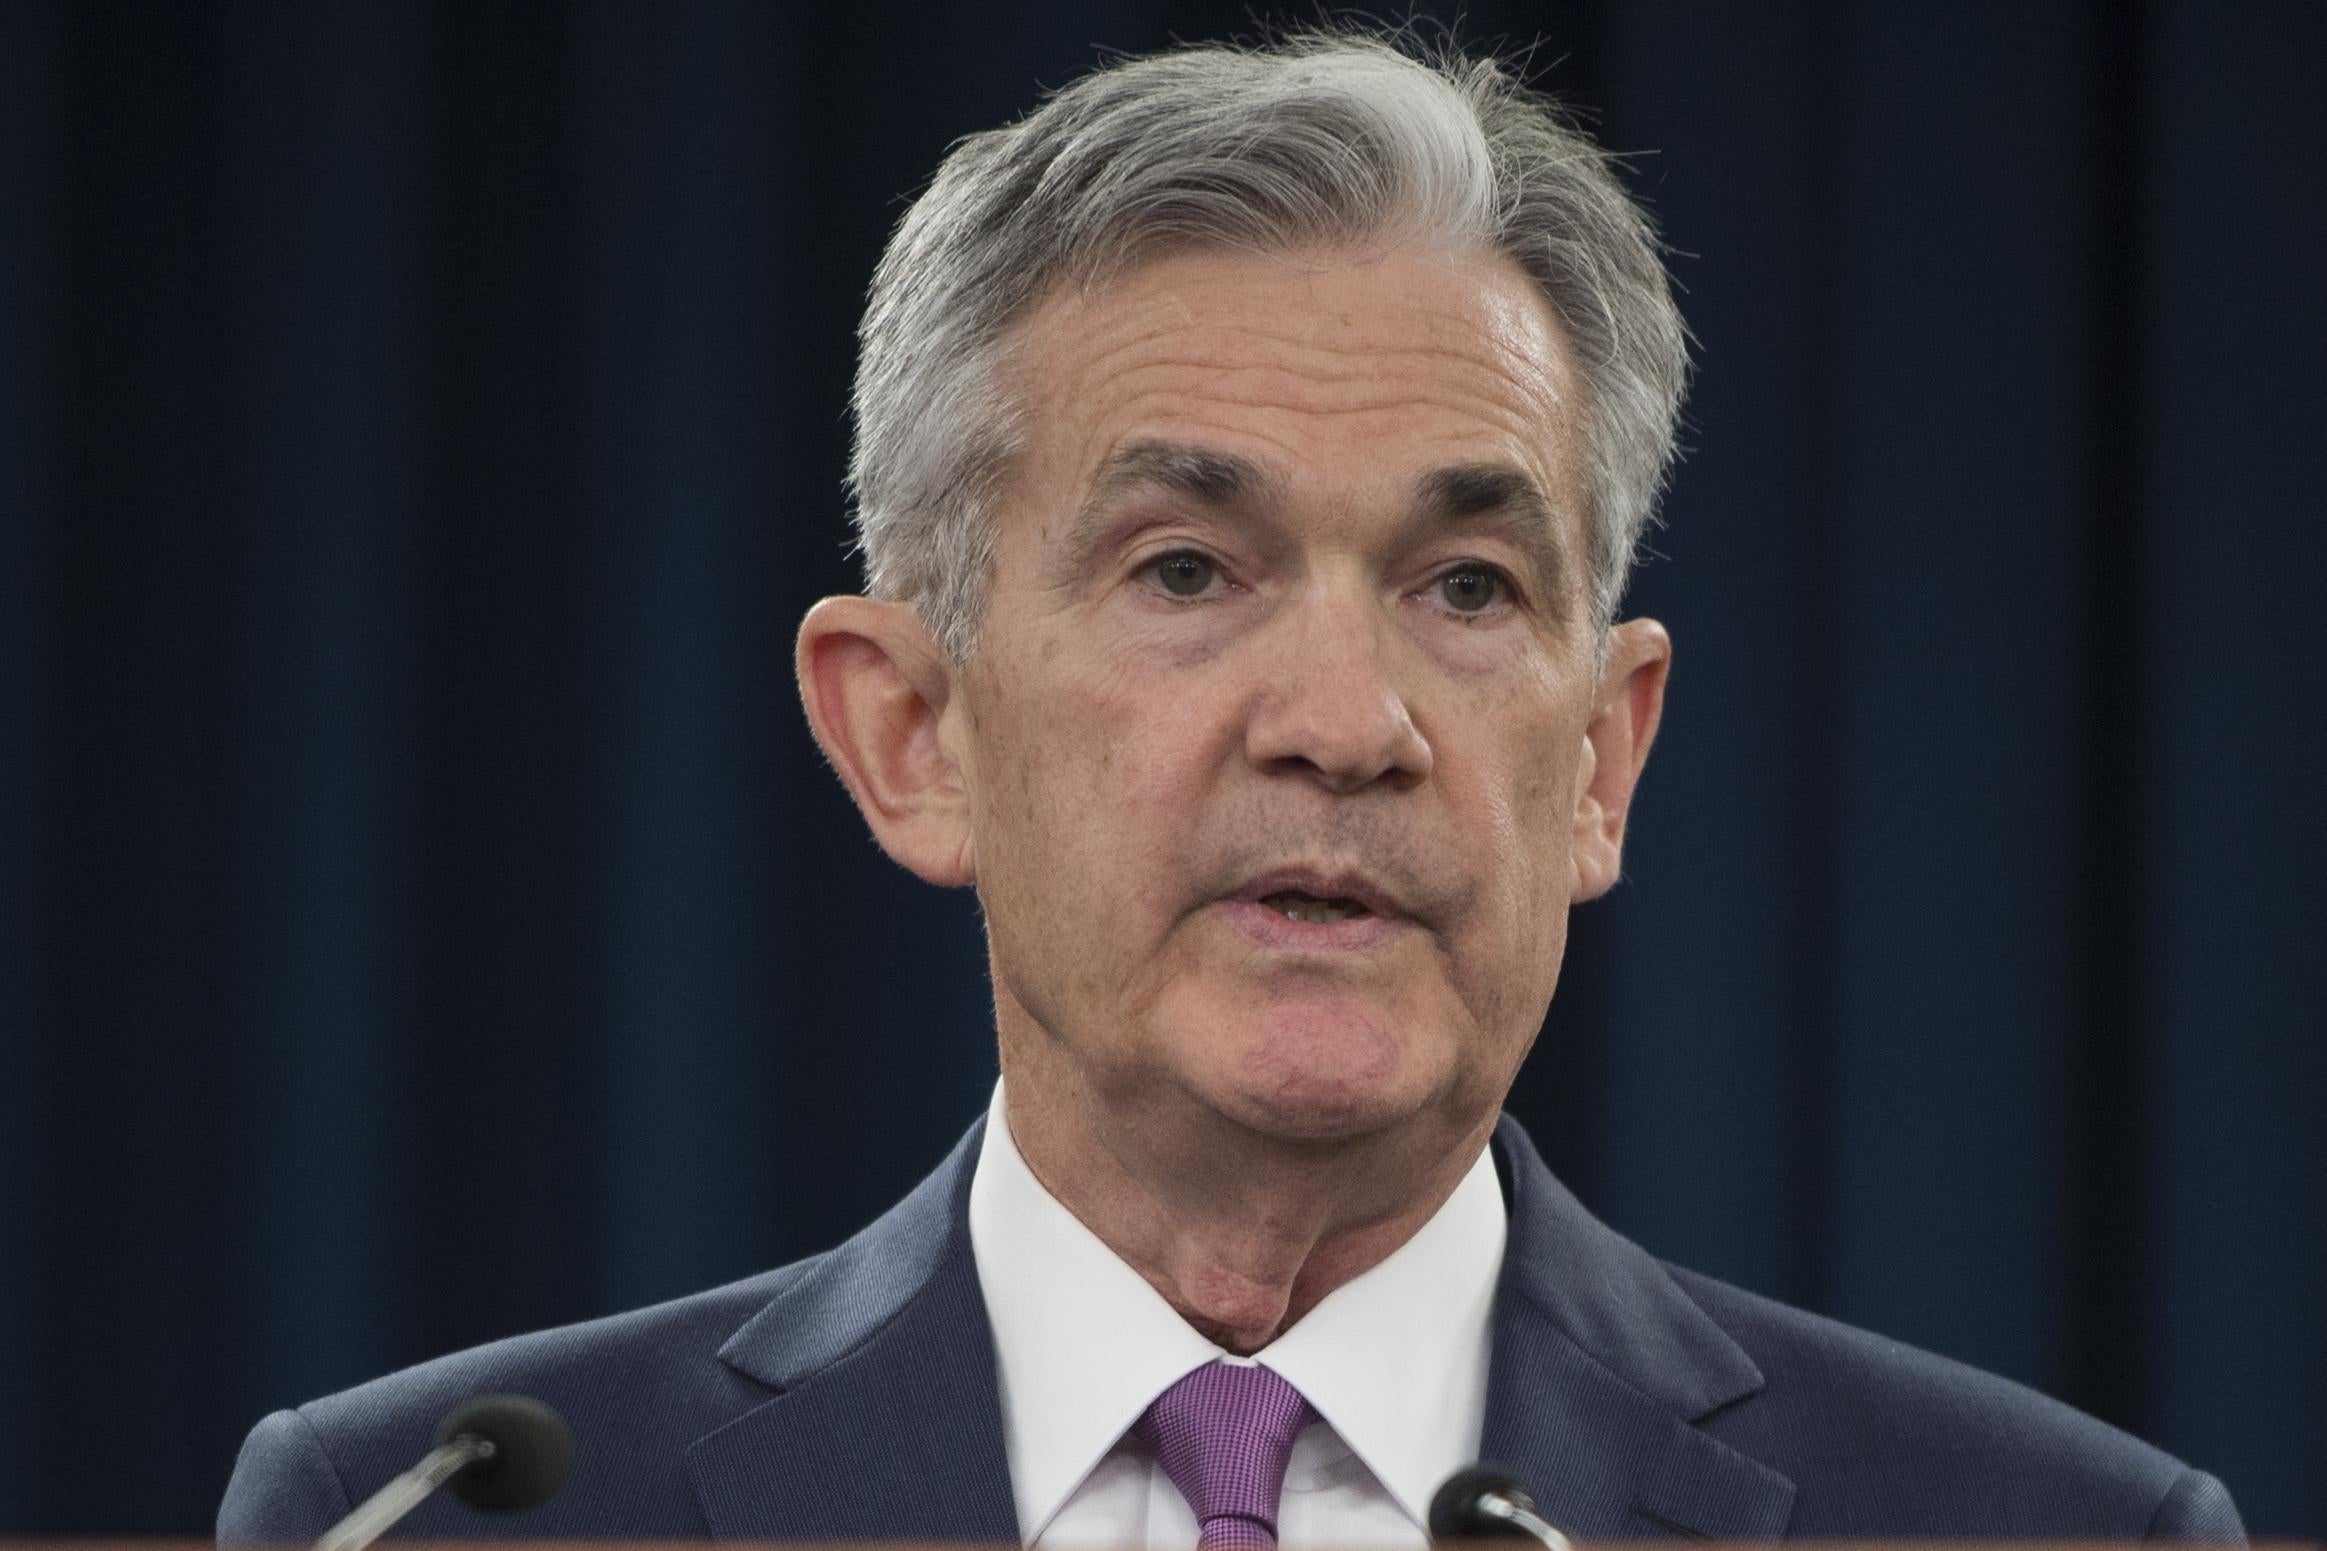 Federal Reserve Board Chairman Jerome Powell speaks during a news conference  in Washington DC on June 13, 2018. - The US Federal Reserve raised the benchmark lending rate on Wednesday, the second increase of the year, and signaled two more hikes were coming in 2018 and four in 2019, a possible sign of concern about accelerating inflation. (Photo by Andrew CABALLERO-REYNOLDS / AFP)        (Photo credit should read ANDREW CABALLERO-REYNOLDS/AFP/Getty Images)